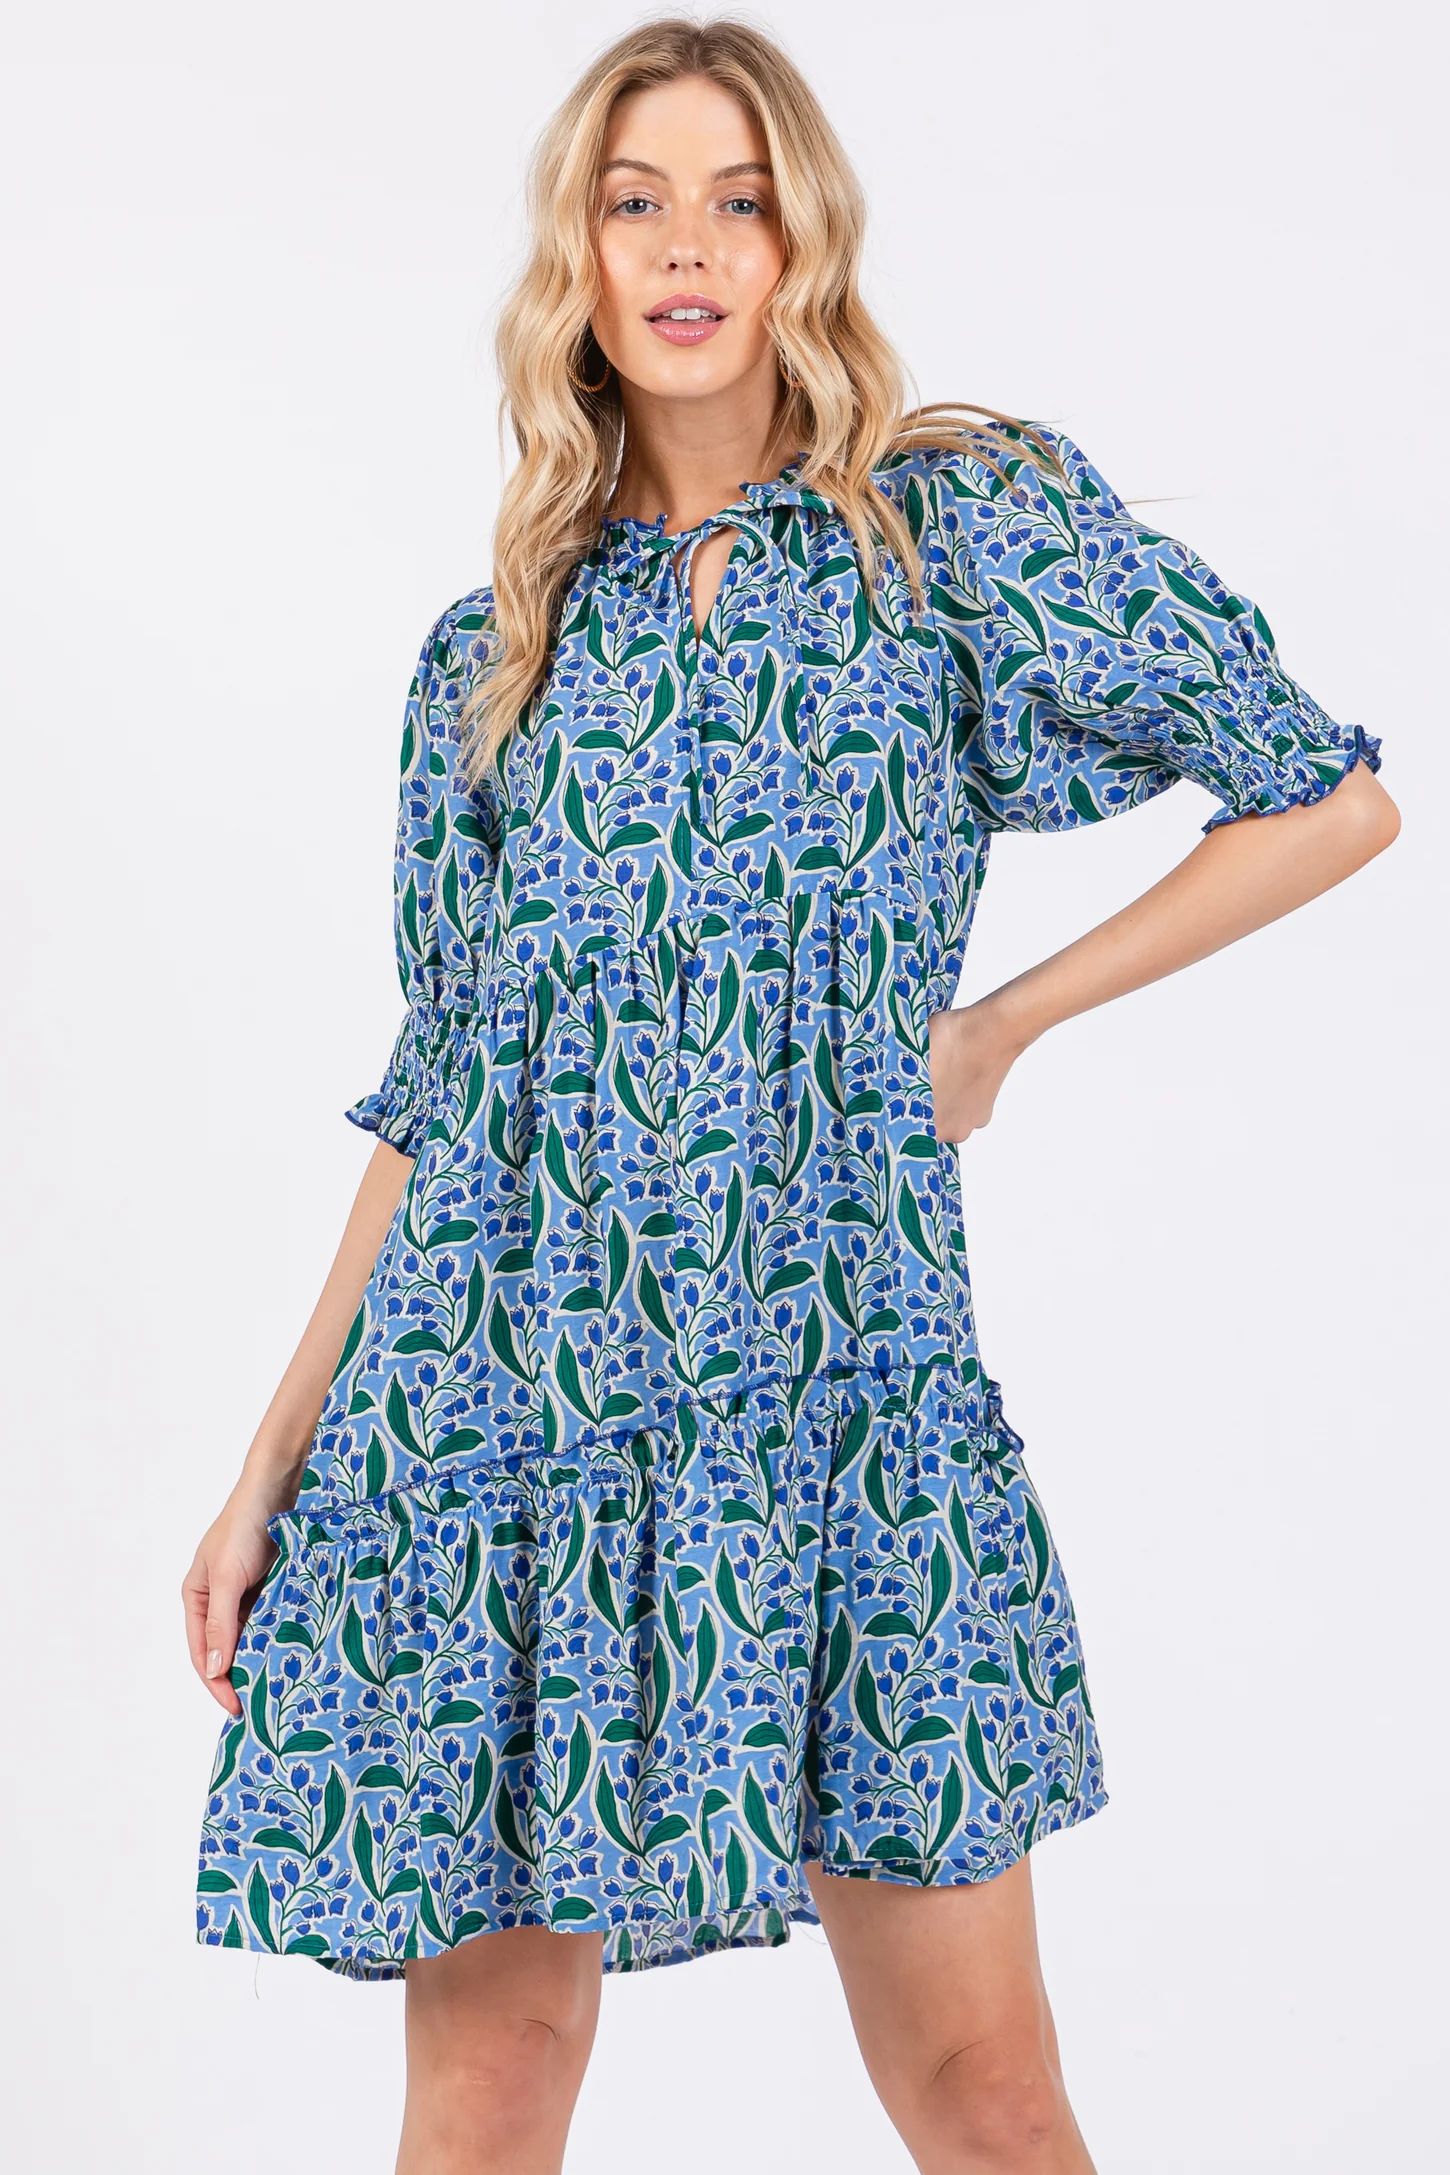 Blue Floral Front Tie Puff Sleeve Dress | PinkBlush Maternity